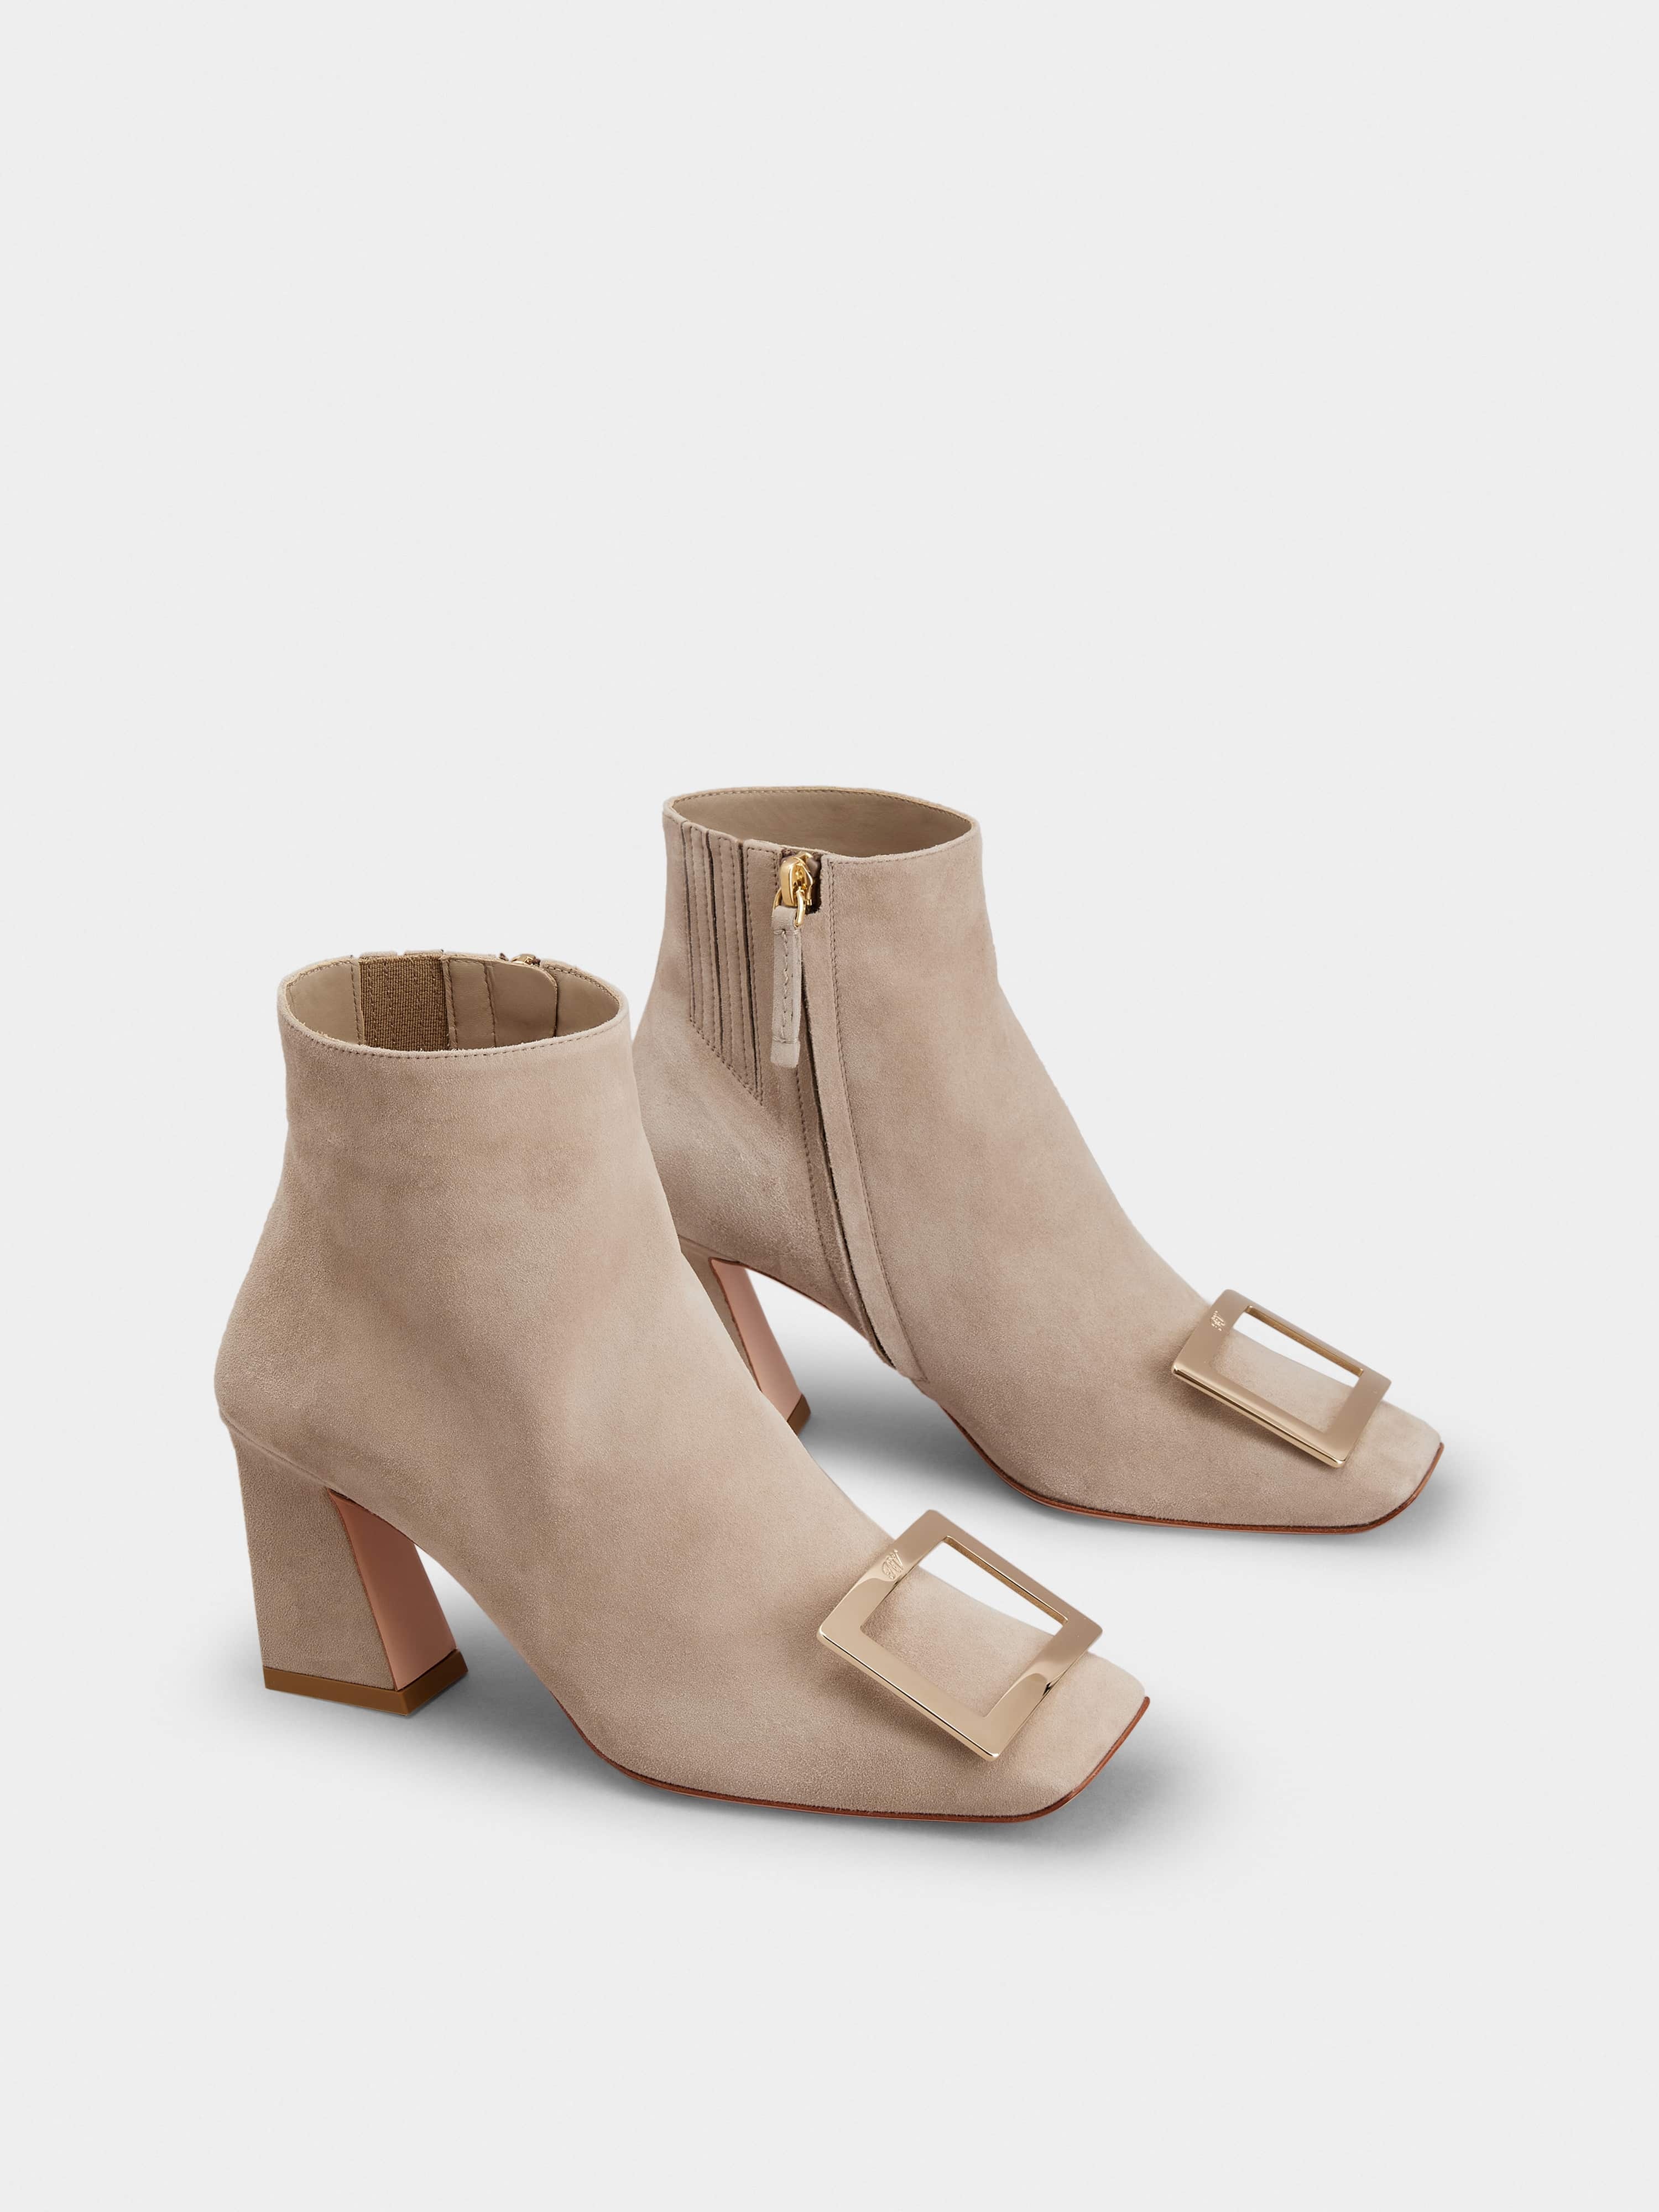 Viv' Square Metal Buckle Ankle Boots in Suede - 2